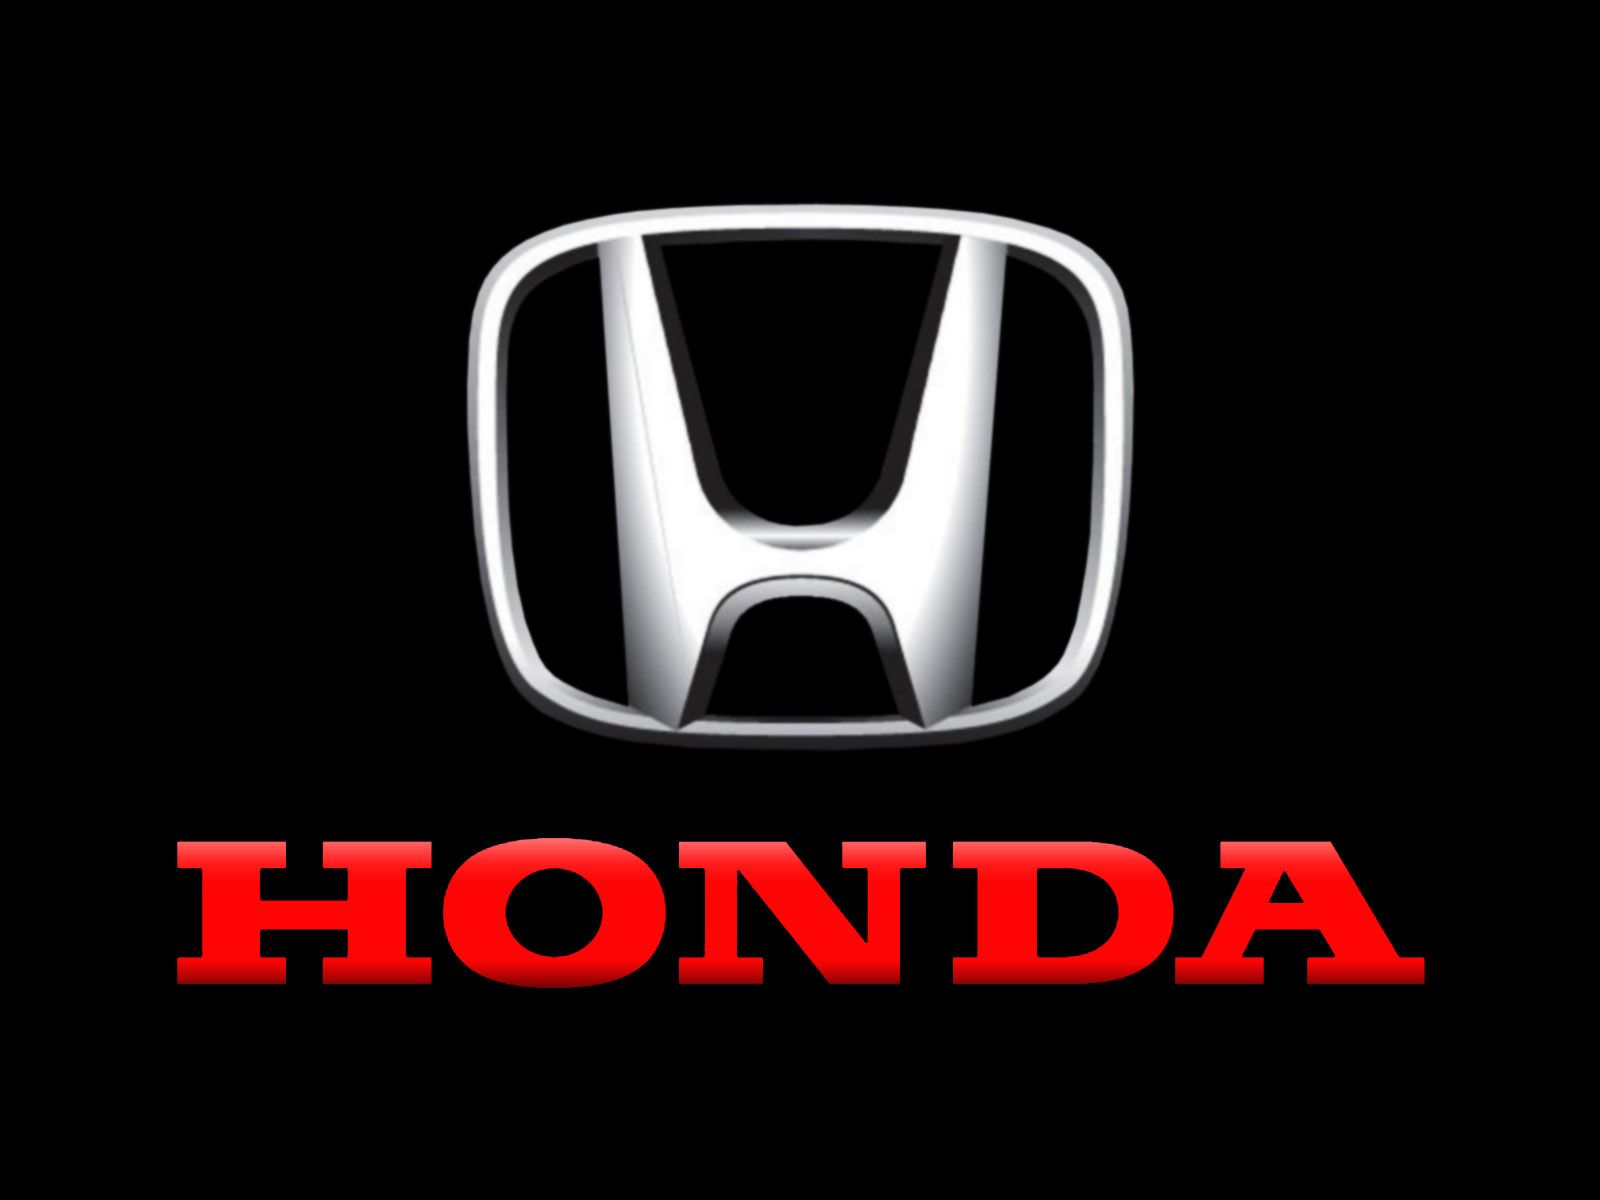 Honda Logo Wallpapers, Pictures, Images